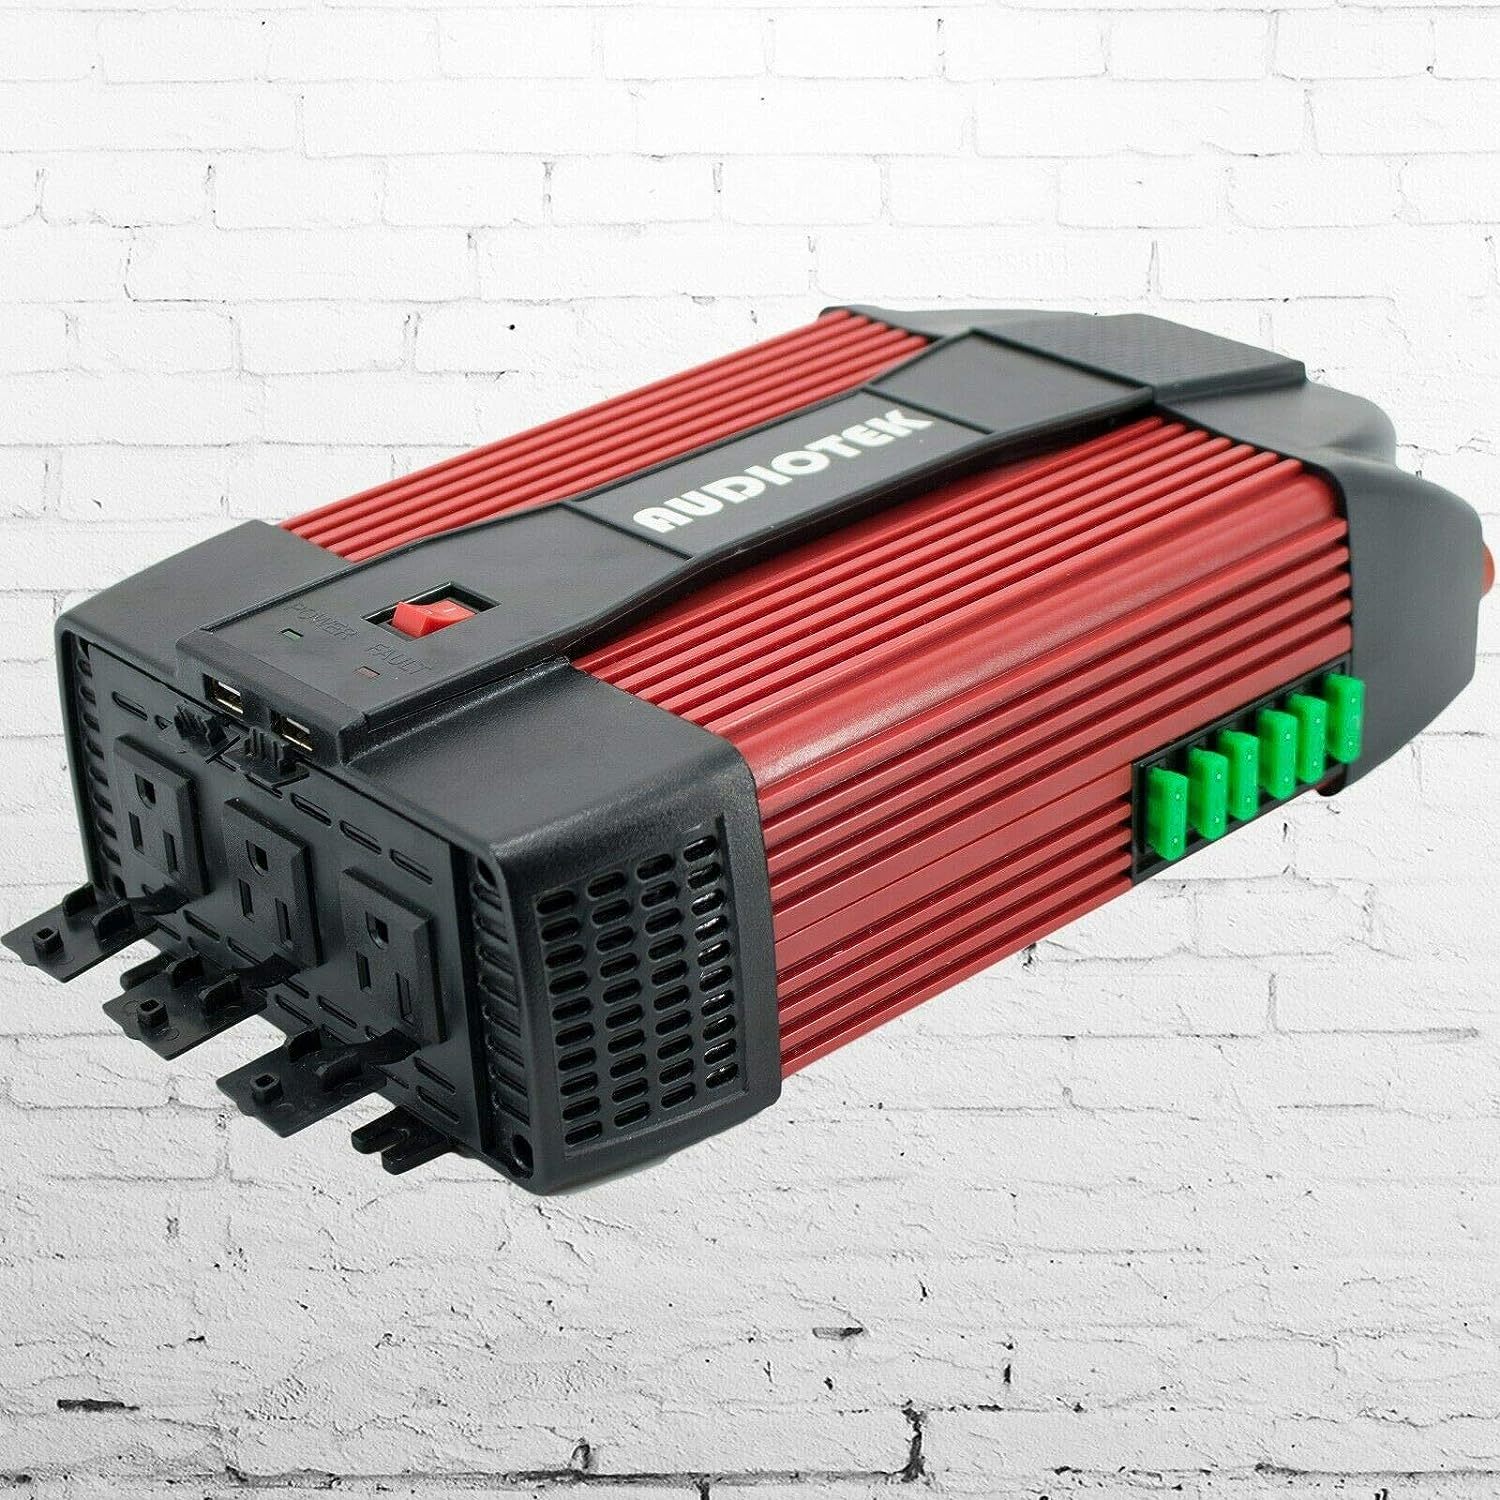 Power Inverter With Usb Port By Audiotek, and 50 similar items